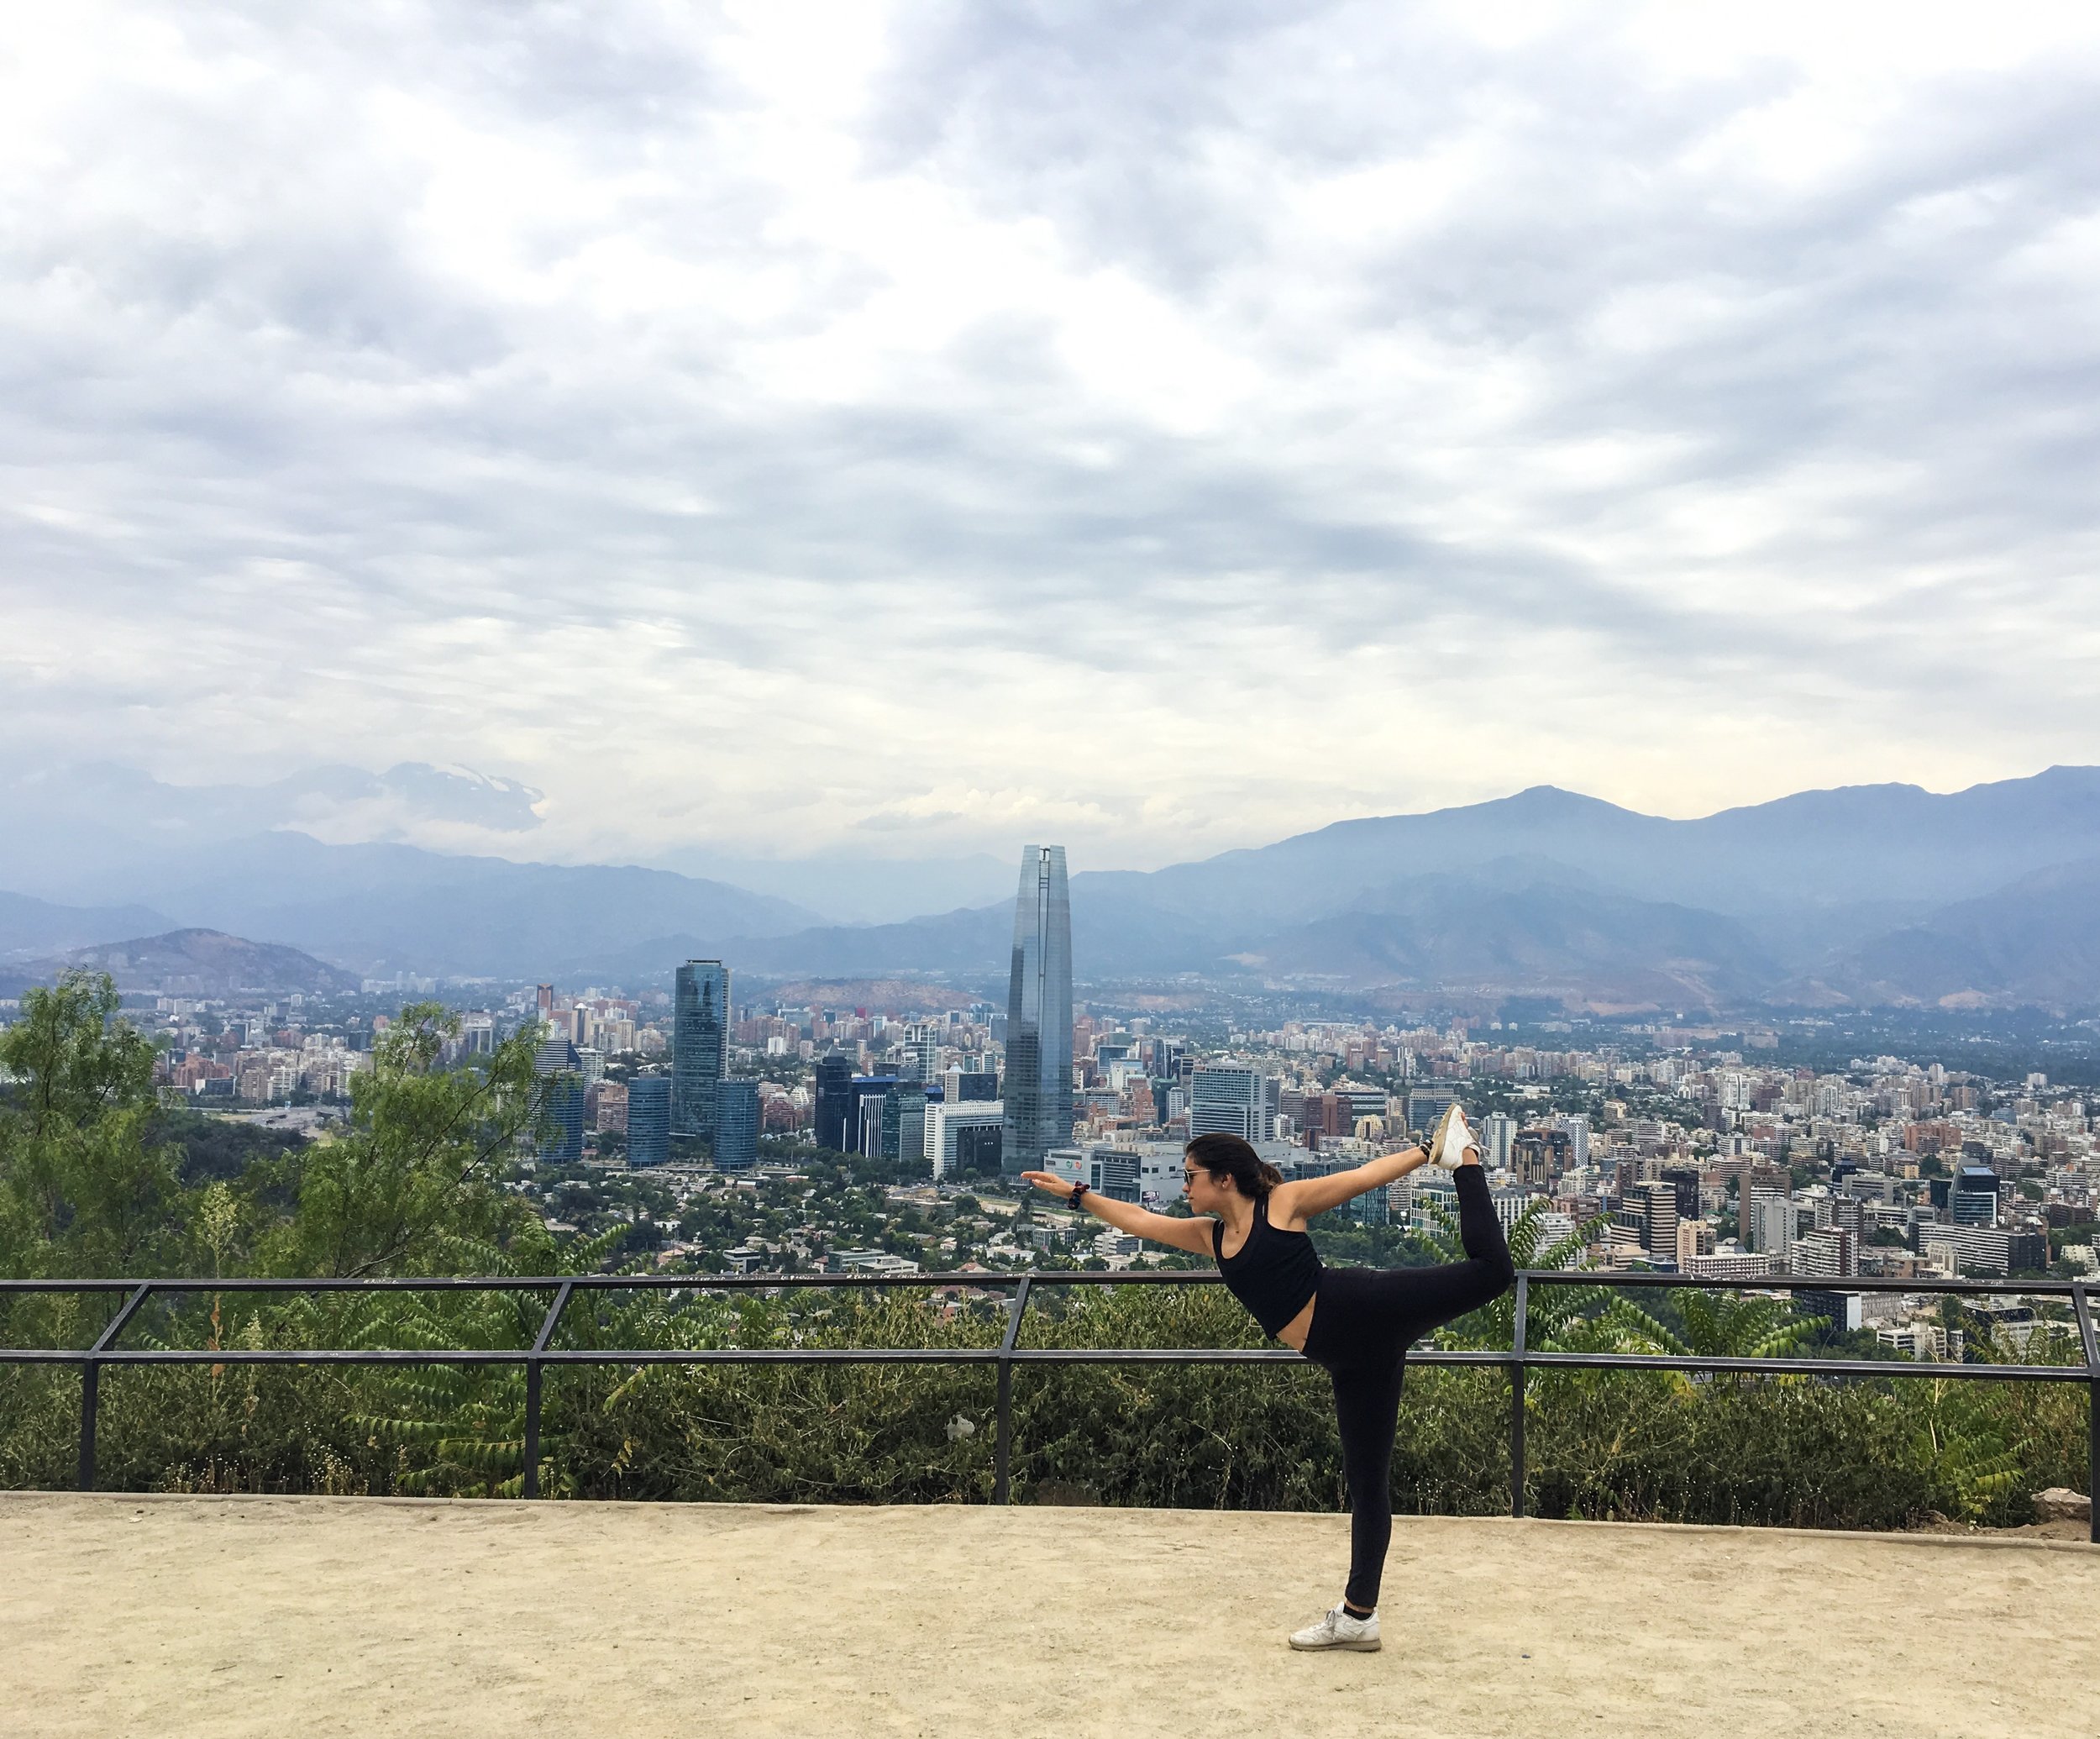 Santiago hikes are the besttt (except for the smog)